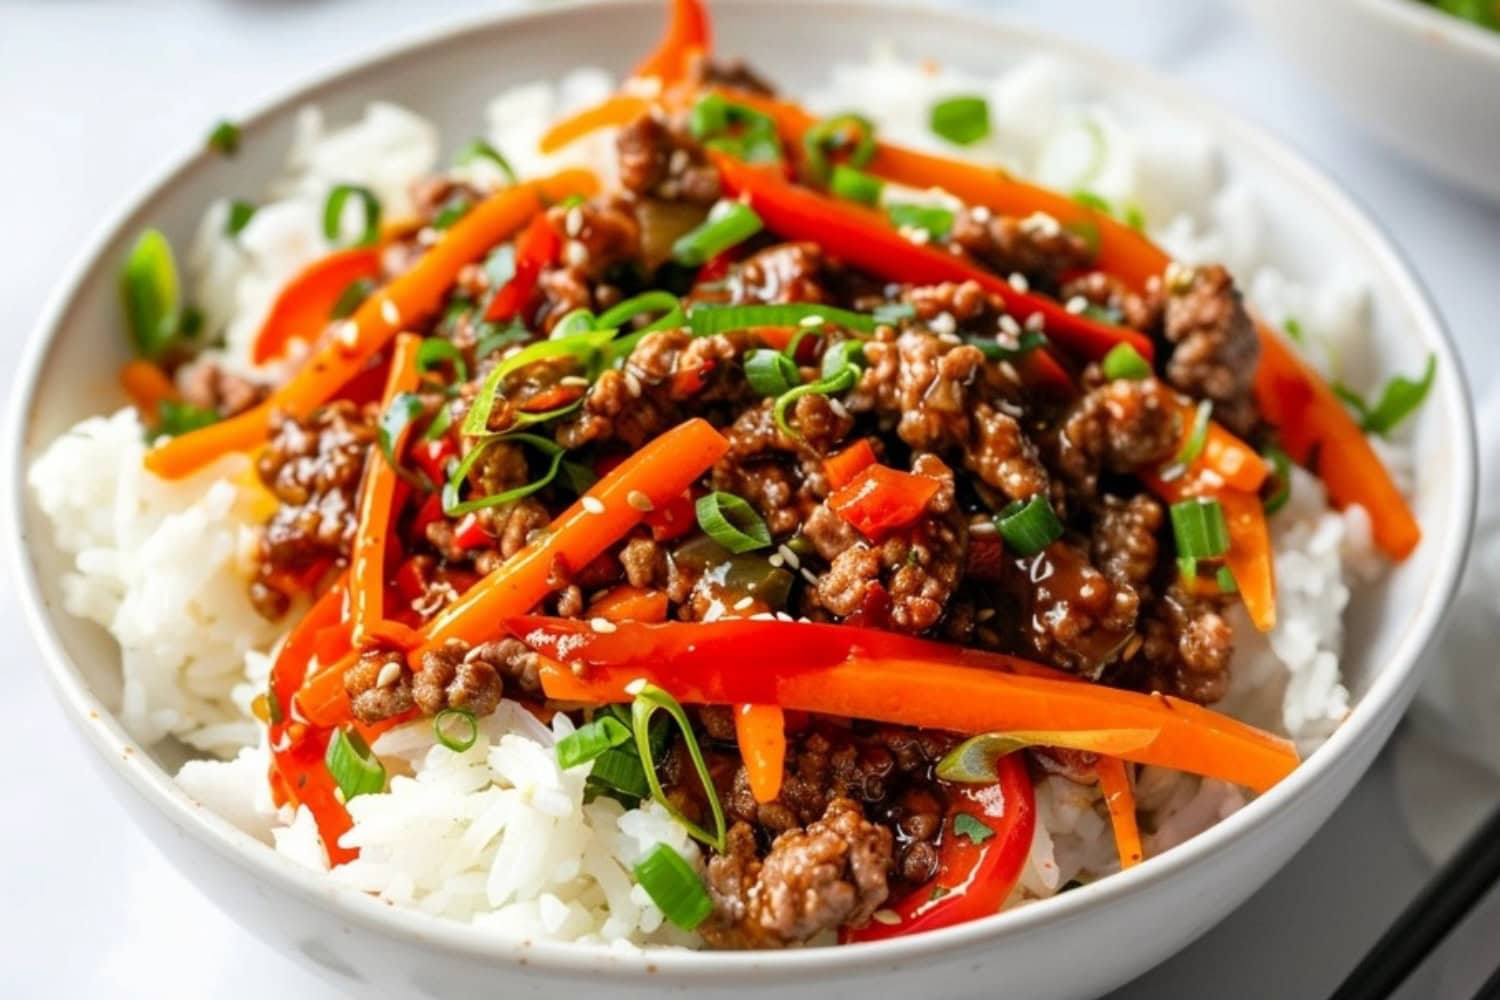 Savory ground beef with carrots, bell peppers and onions topped on a white rice in a bowl.